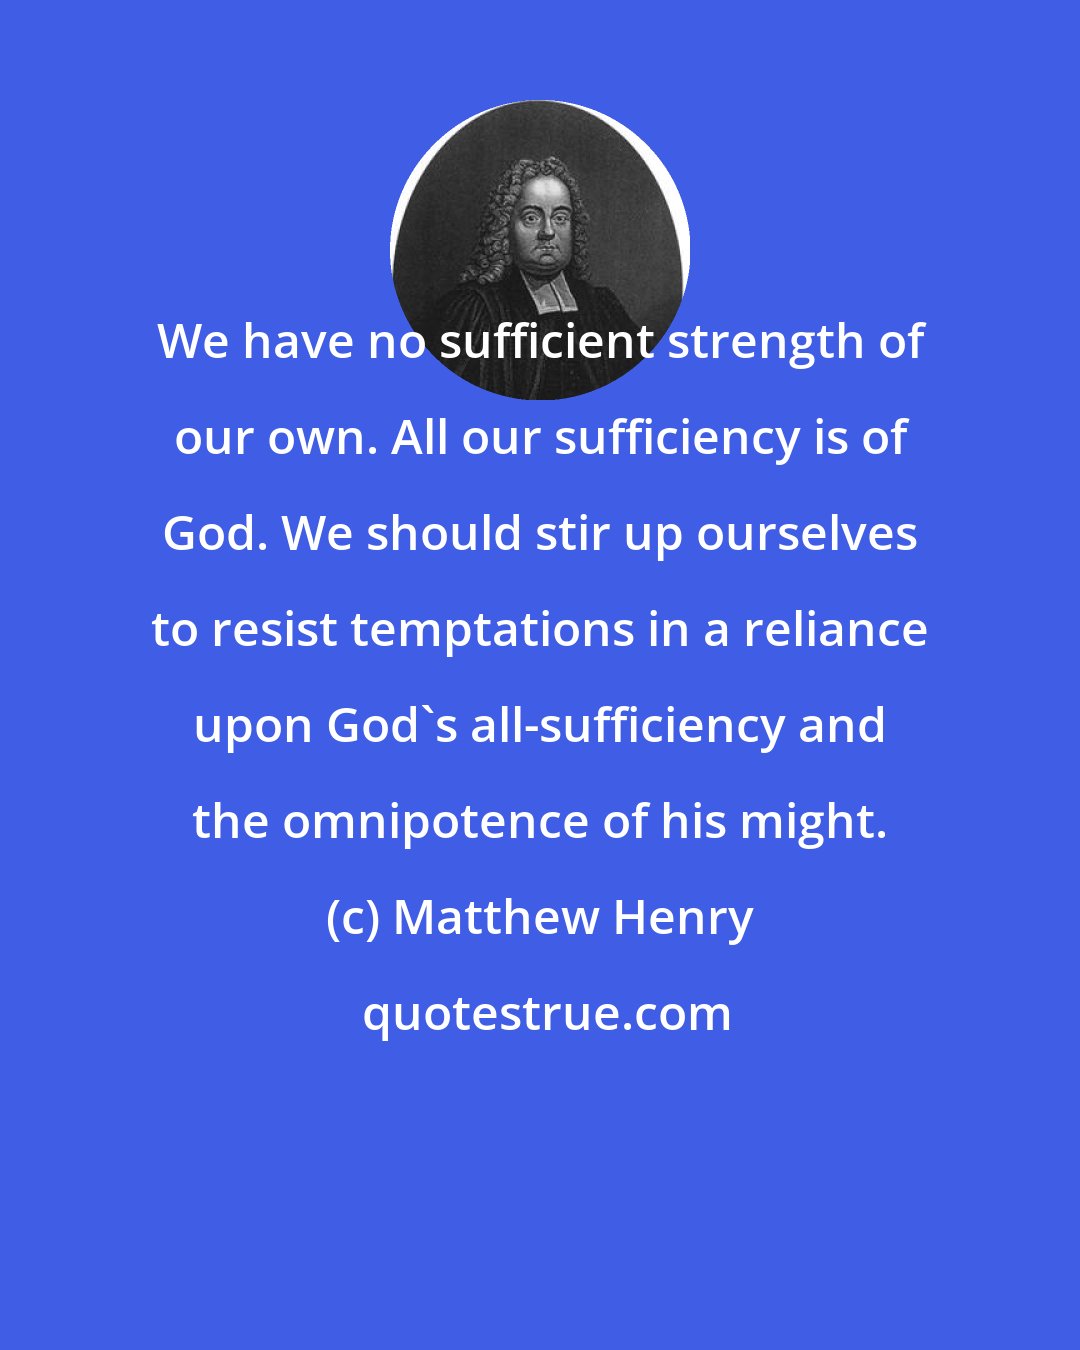 Matthew Henry: We have no sufficient strength of our own. All our sufficiency is of God. We should stir up ourselves to resist temptations in a reliance upon God's all-sufficiency and the omnipotence of his might.